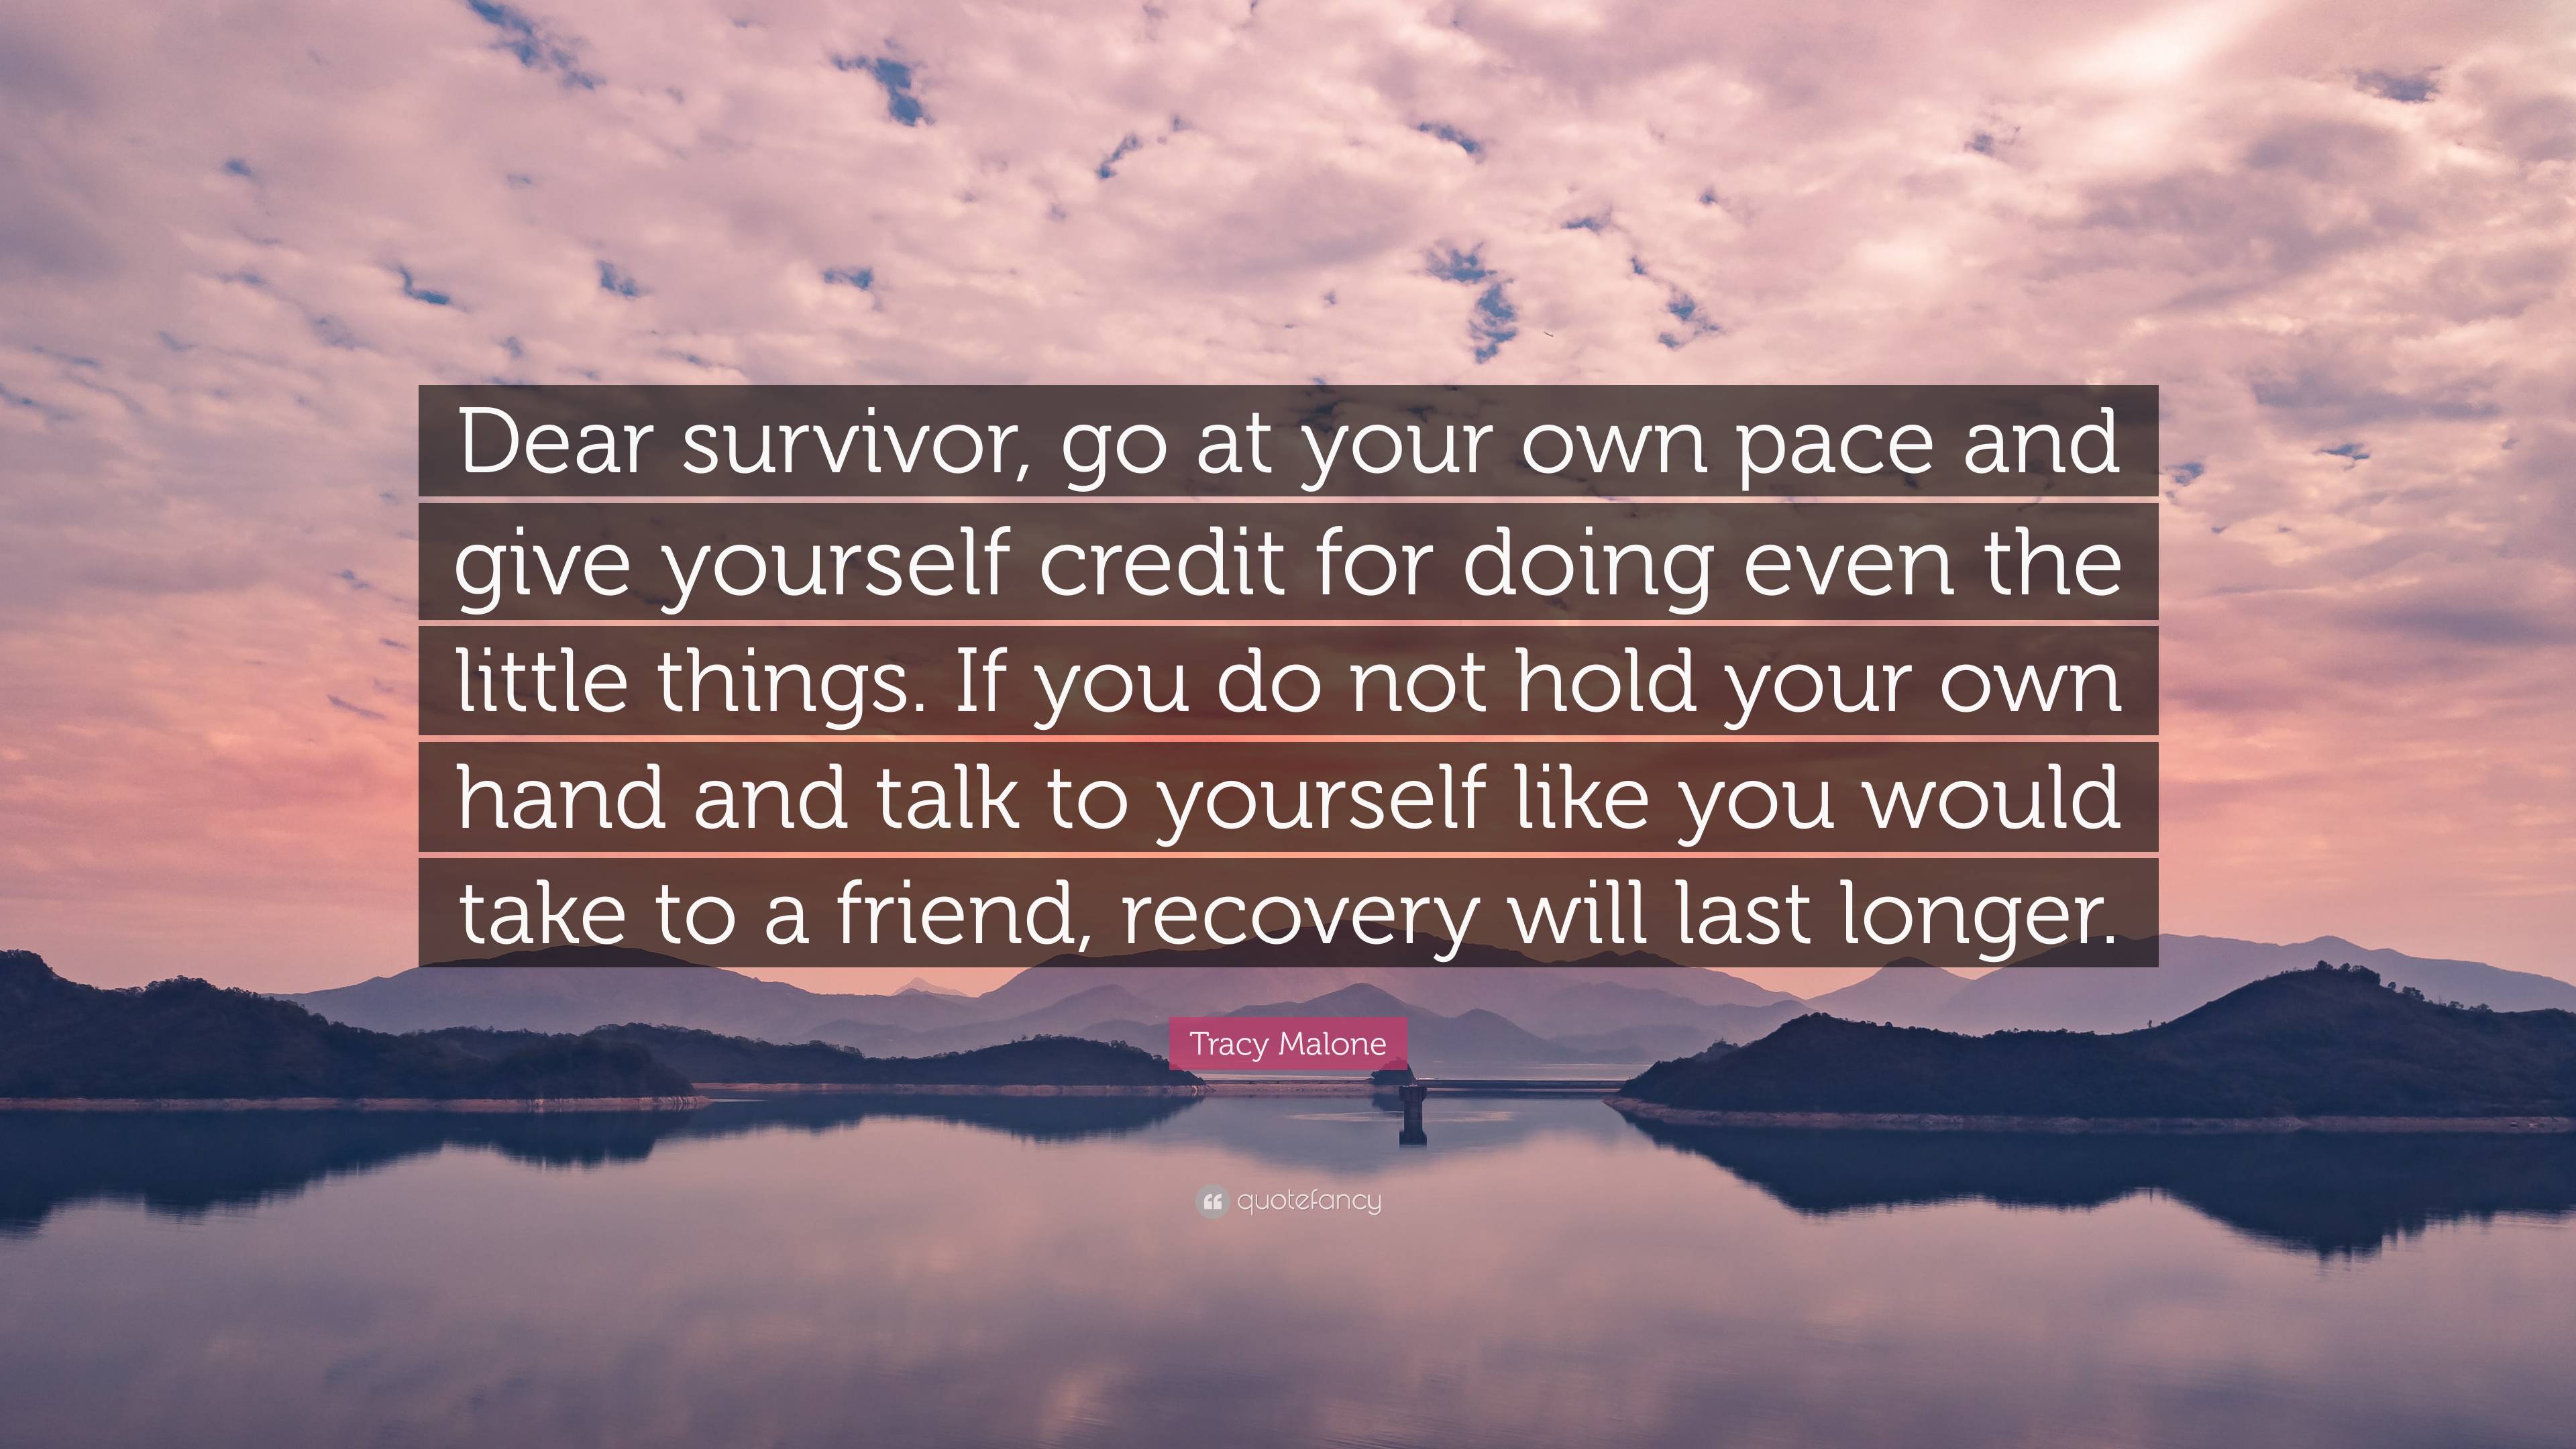 Tracy Malone Quote: “Dear survivor, go at your own pace and give yourself  credit for doing even the little things. If you do not hold your ow”